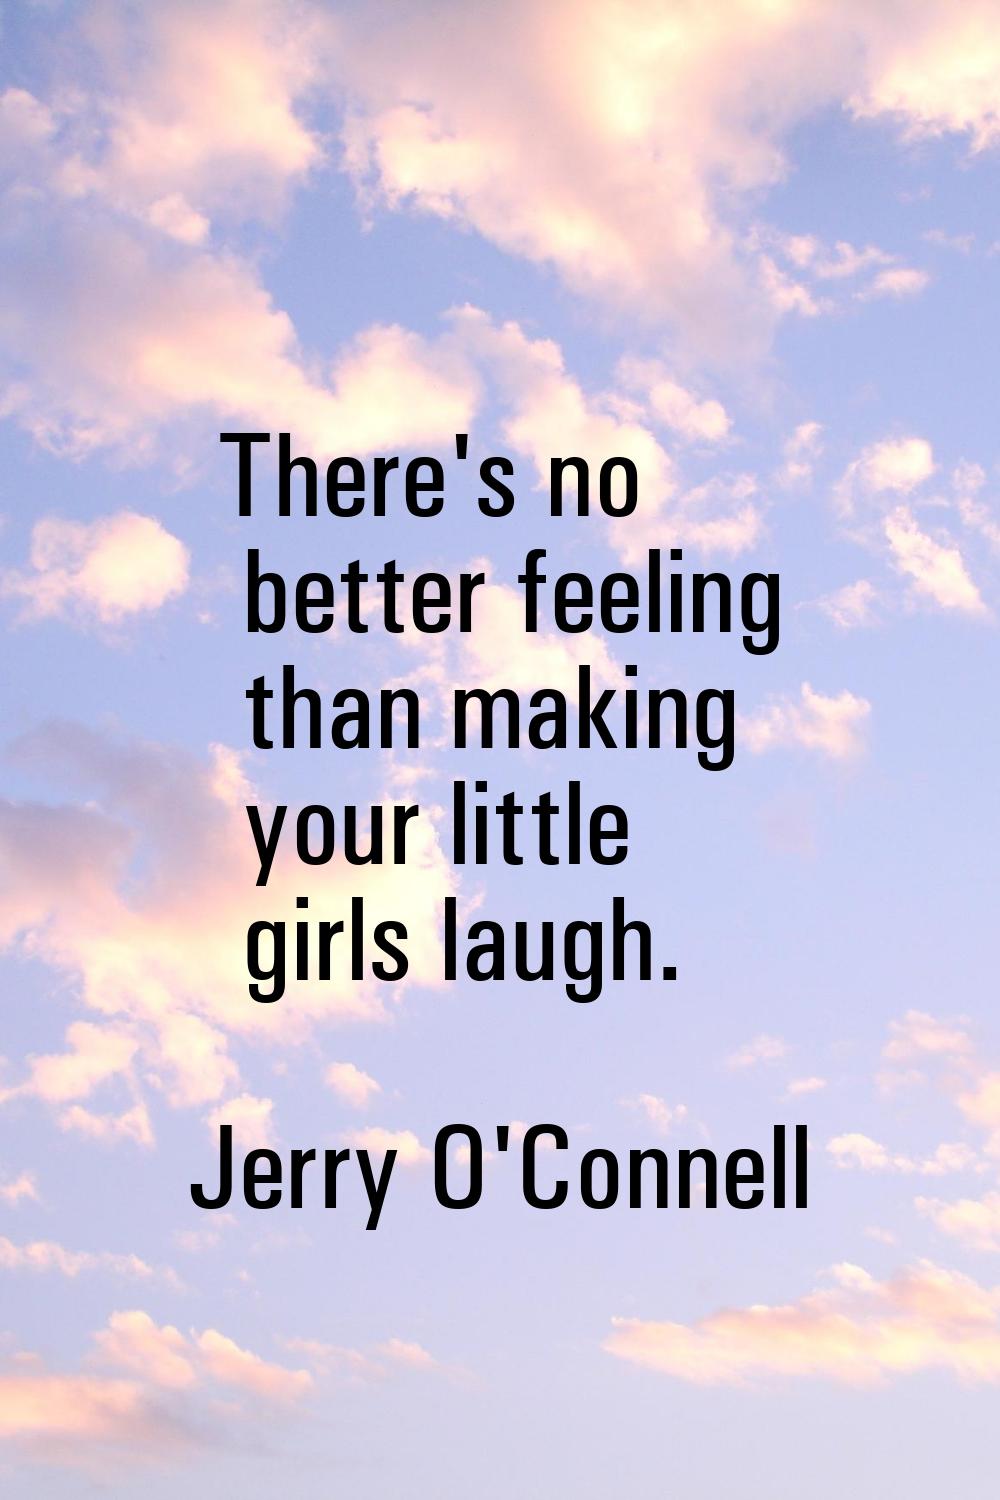 There's no better feeling than making your little girls laugh.